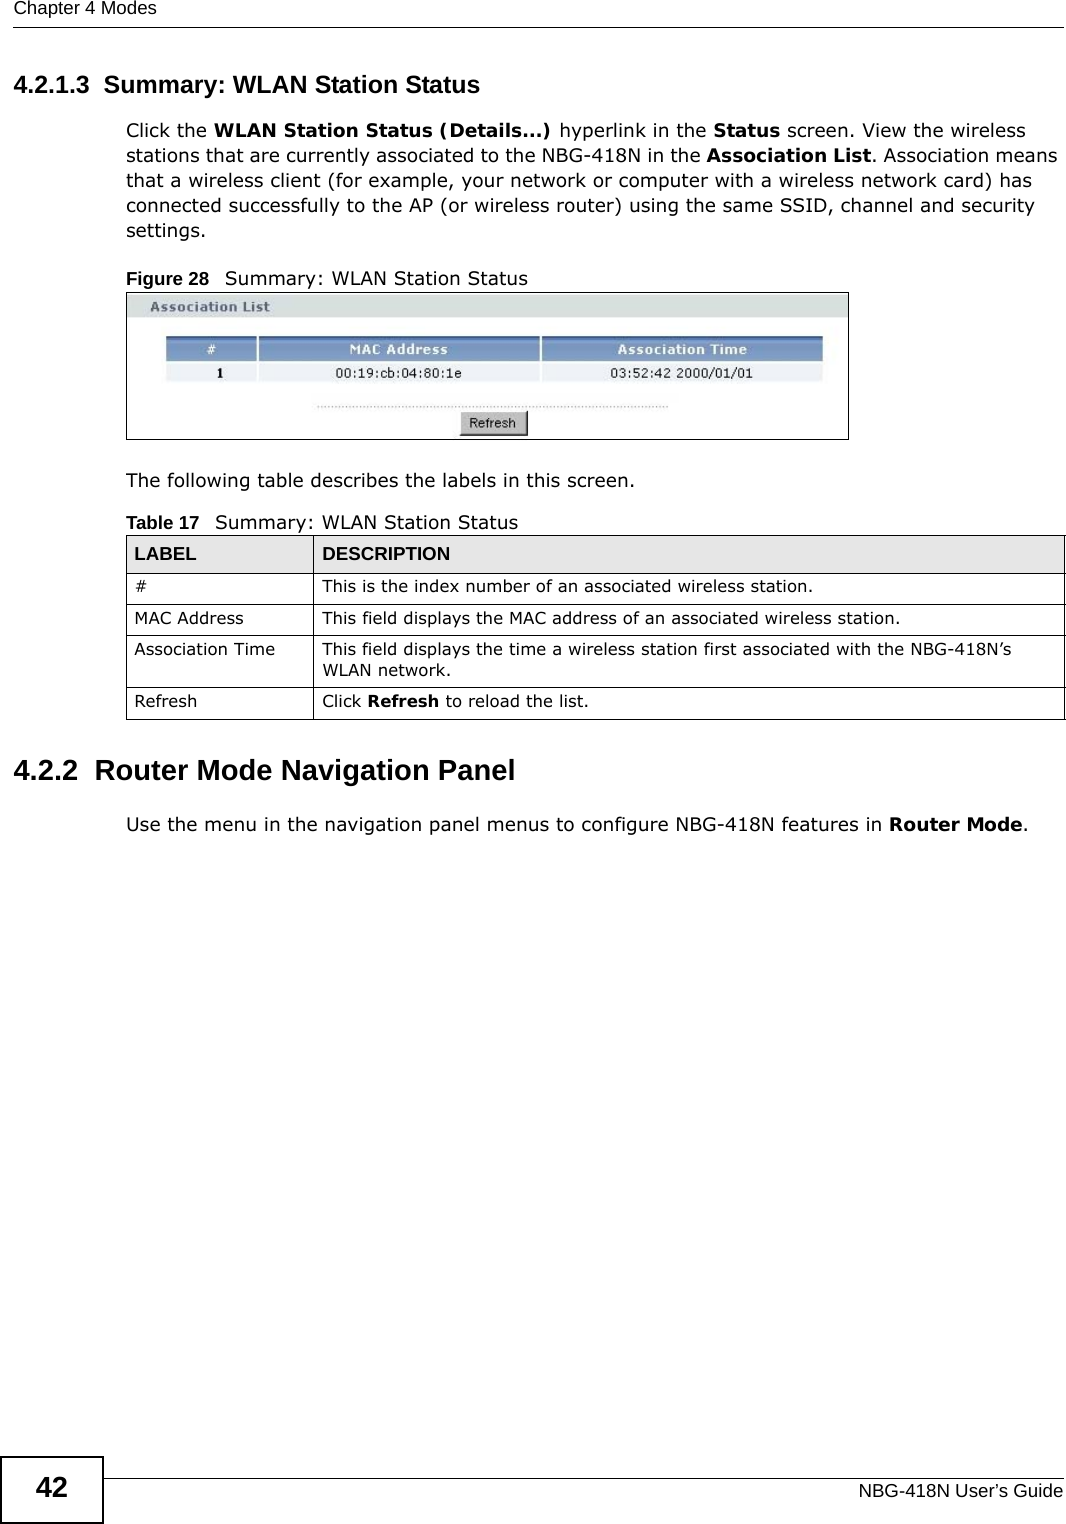 Chapter 4 ModesNBG-418N User’s Guide424.2.1.3  Summary: WLAN Station Status     Click the WLAN Station Status (Details...) hyperlink in the Status screen. View the wireless stations that are currently associated to the NBG-418N in the Association List. Association means that a wireless client (for example, your network or computer with a wireless network card) has connected successfully to the AP (or wireless router) using the same SSID, channel and security settings.Figure 28   Summary: WLAN Station StatusThe following table describes the labels in this screen.4.2.2  Router Mode Navigation PanelUse the menu in the navigation panel menus to configure NBG-418N features in Router Mode.Table 17   Summary: WLAN Station StatusLABEL DESCRIPTION#  This is the index number of an associated wireless station. MAC Address  This field displays the MAC address of an associated wireless station.Association Time This field displays the time a wireless station first associated with the NBG-418N’s WLAN network.Refresh Click Refresh to reload the list. 